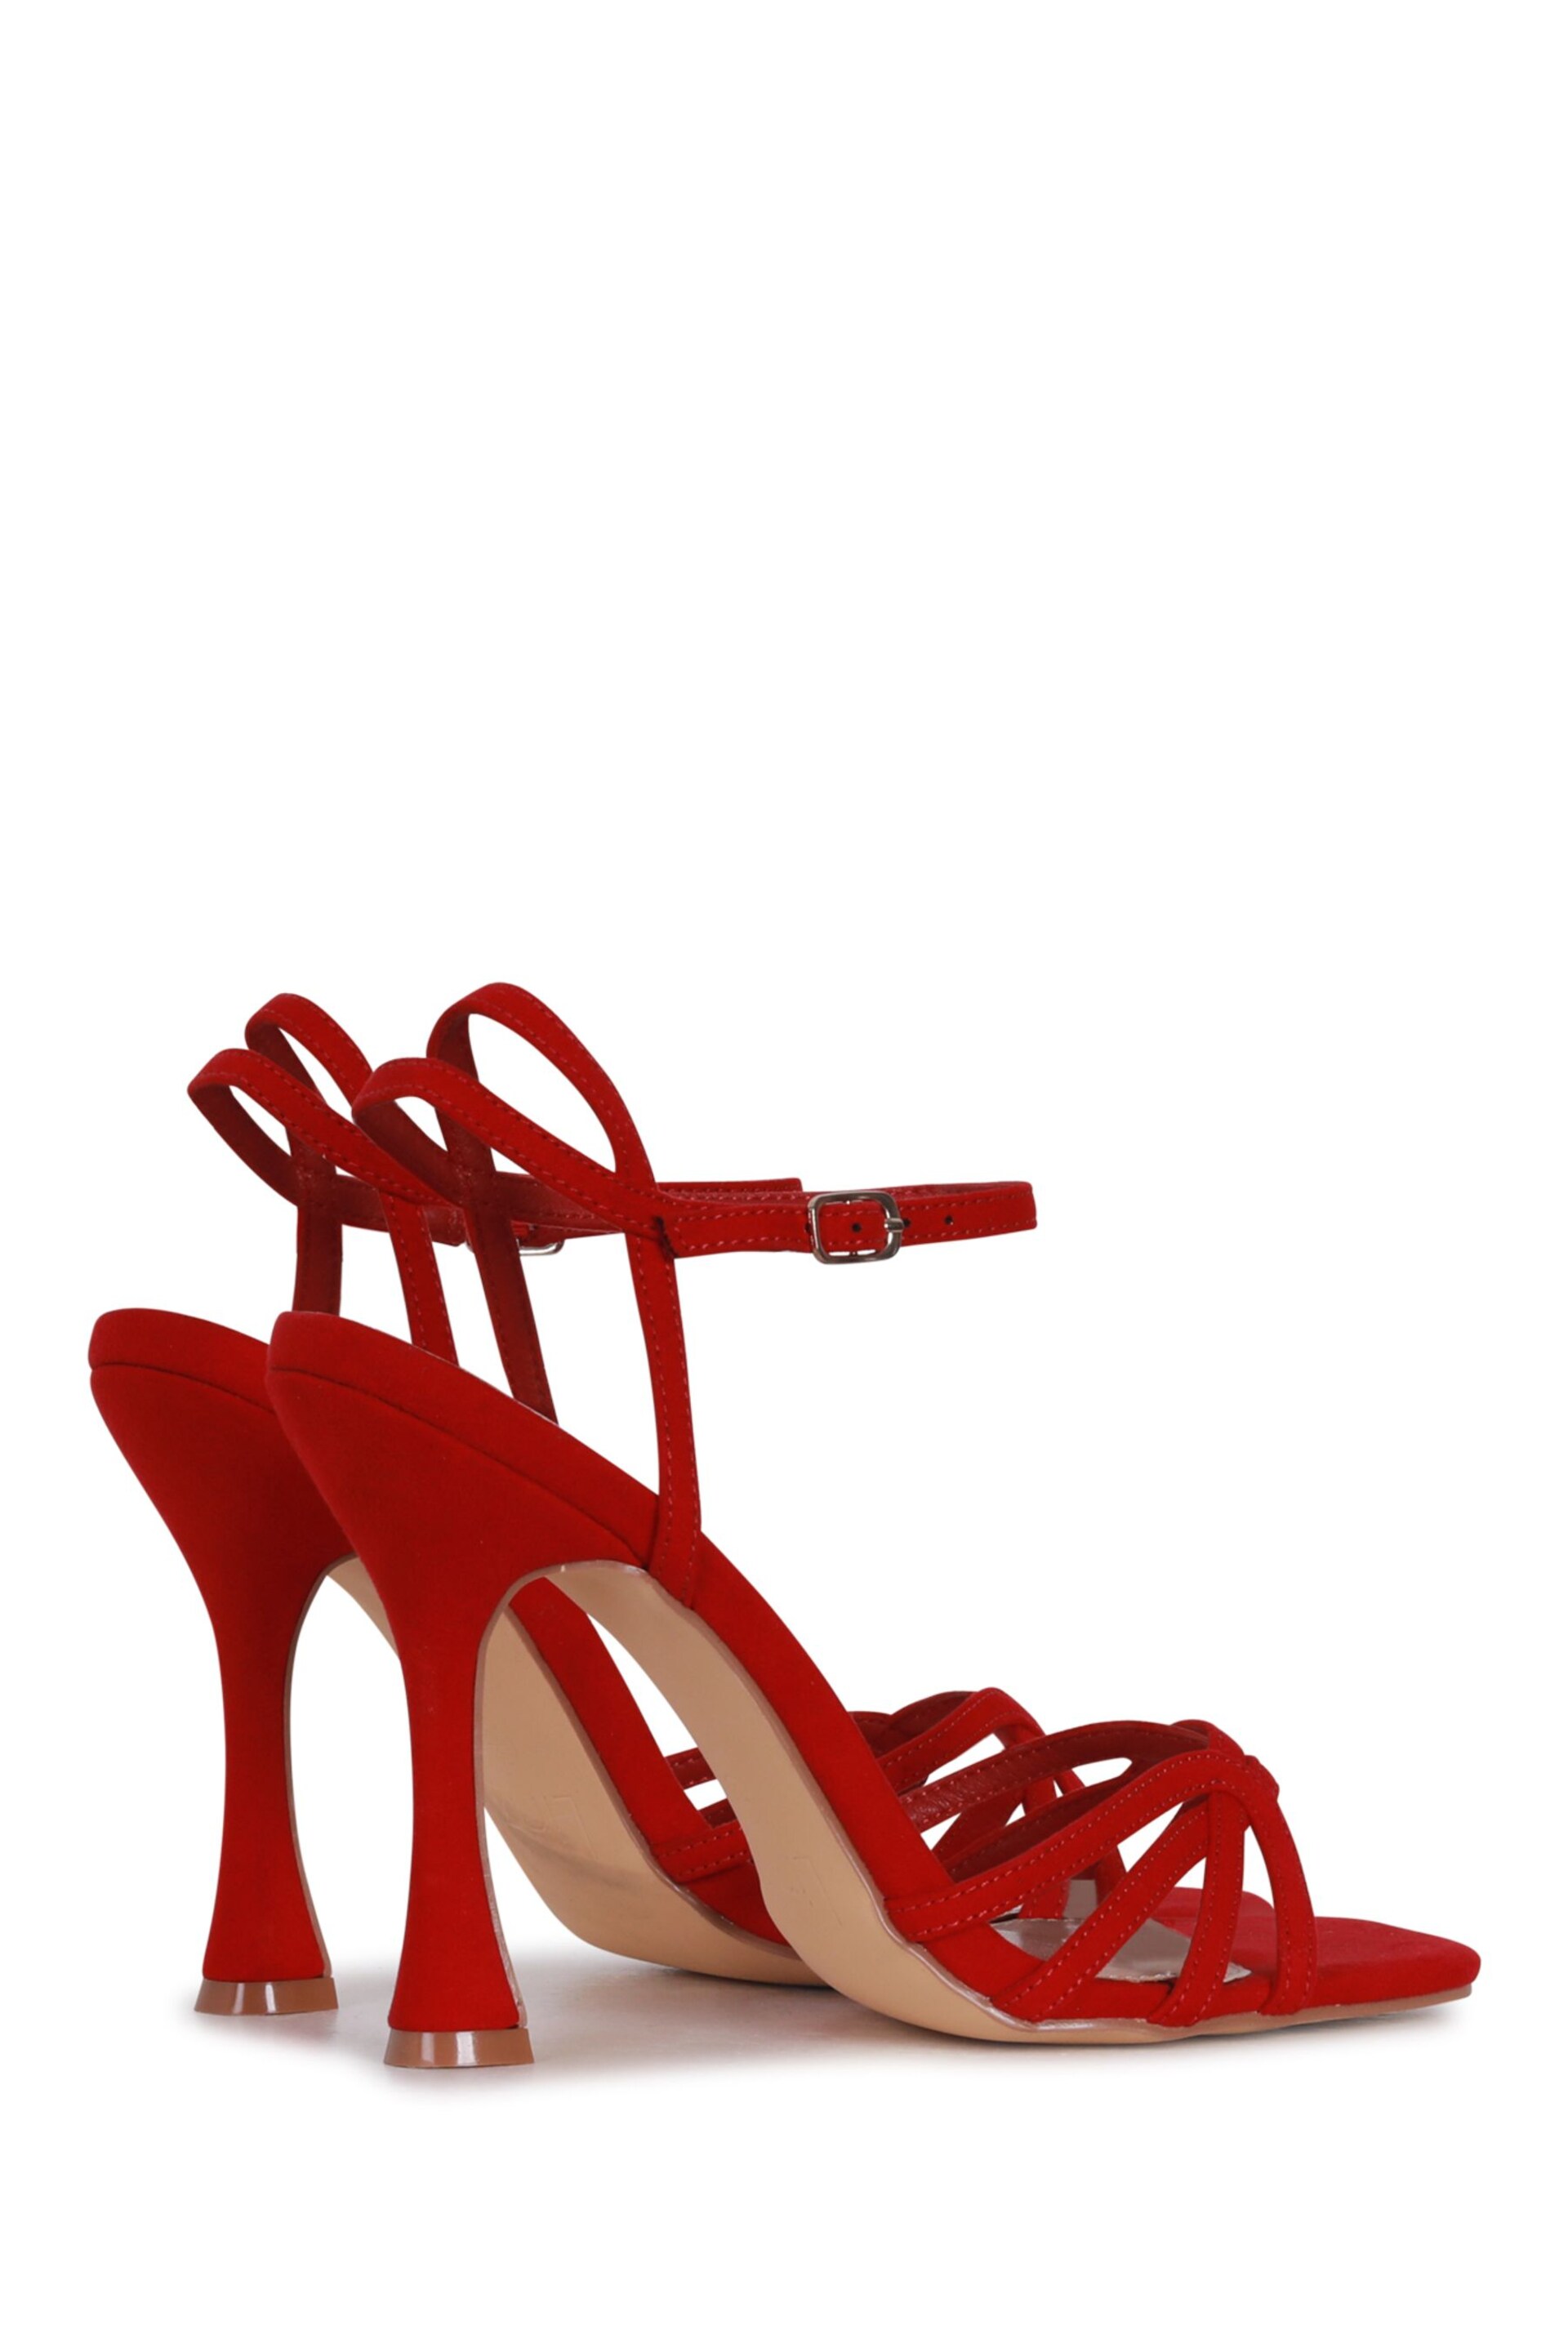 Linzi Red Faux Suede Serena Cut Out Stiletto Heeled Sandal - Image 5 of 5